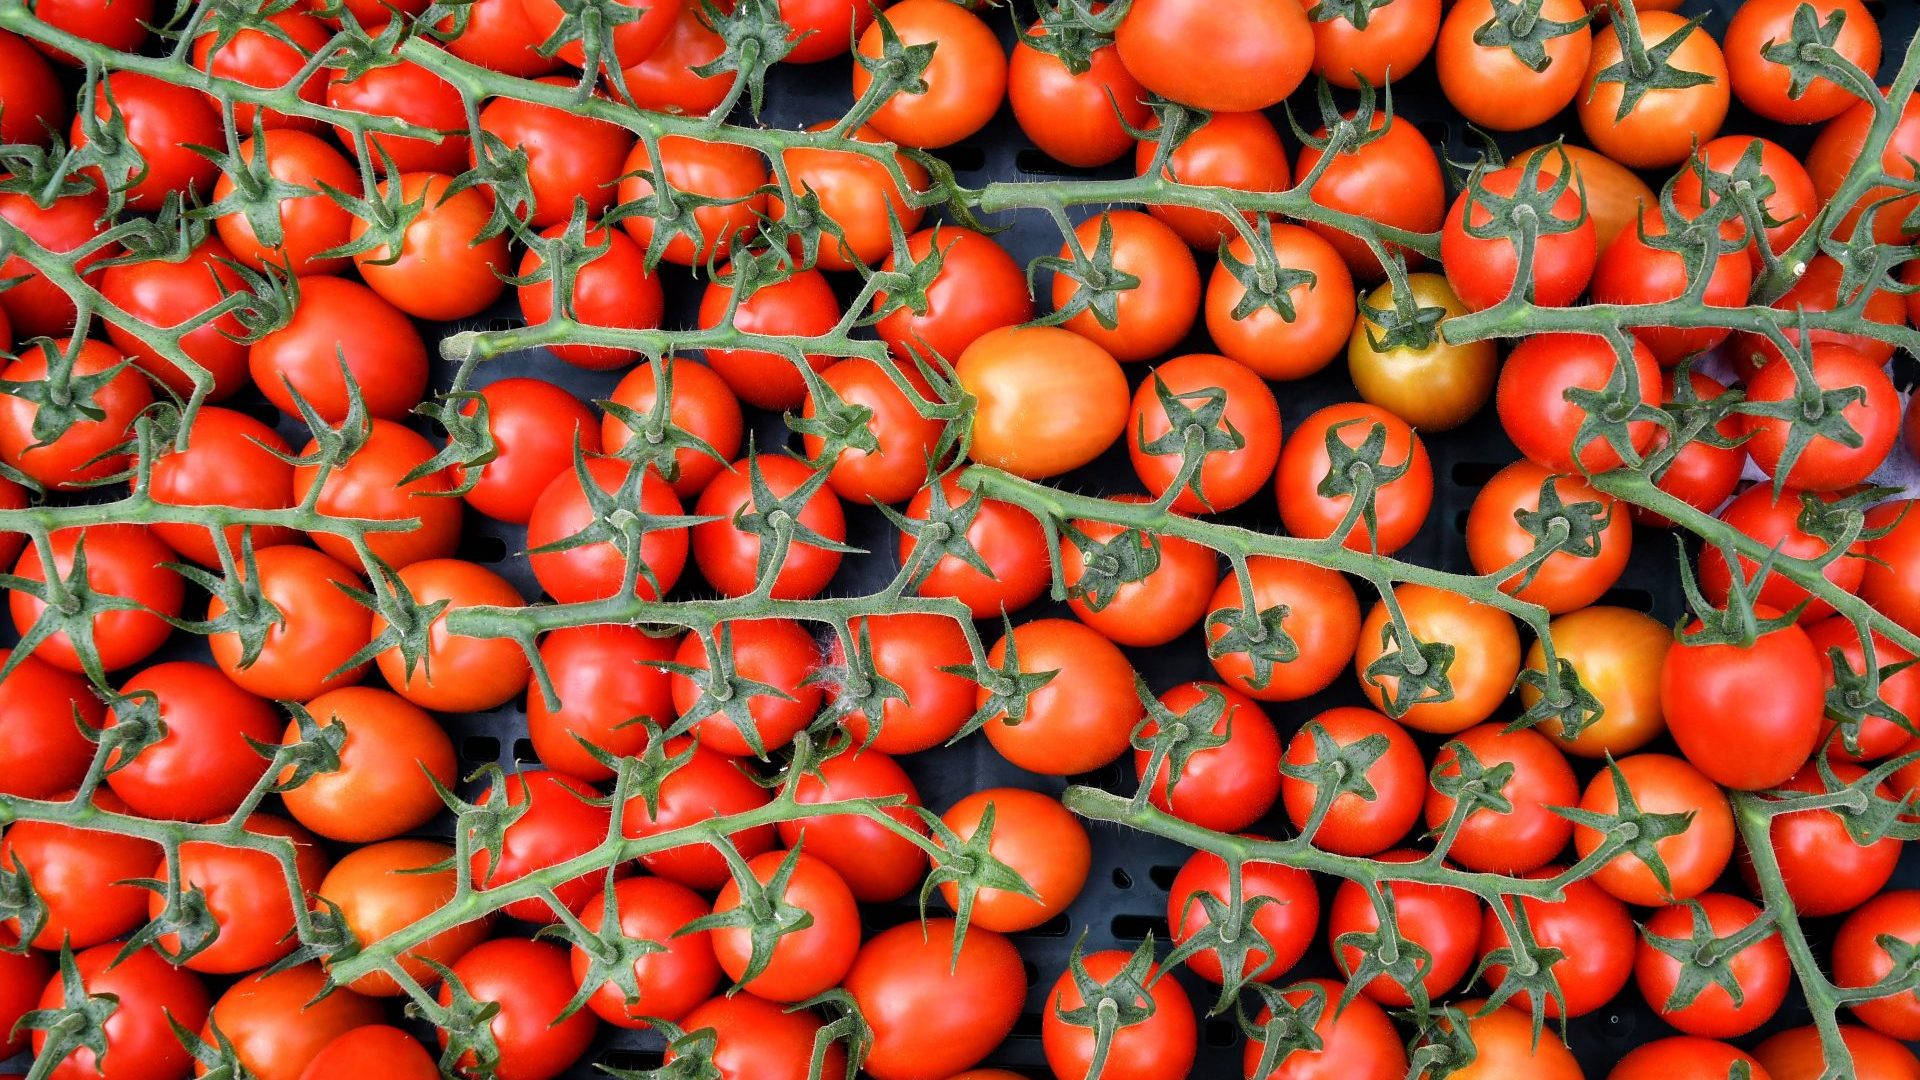 Freshly picked tomatoes at the Sfera Agricola farm in Grosseto, Italy. Photo: Getty